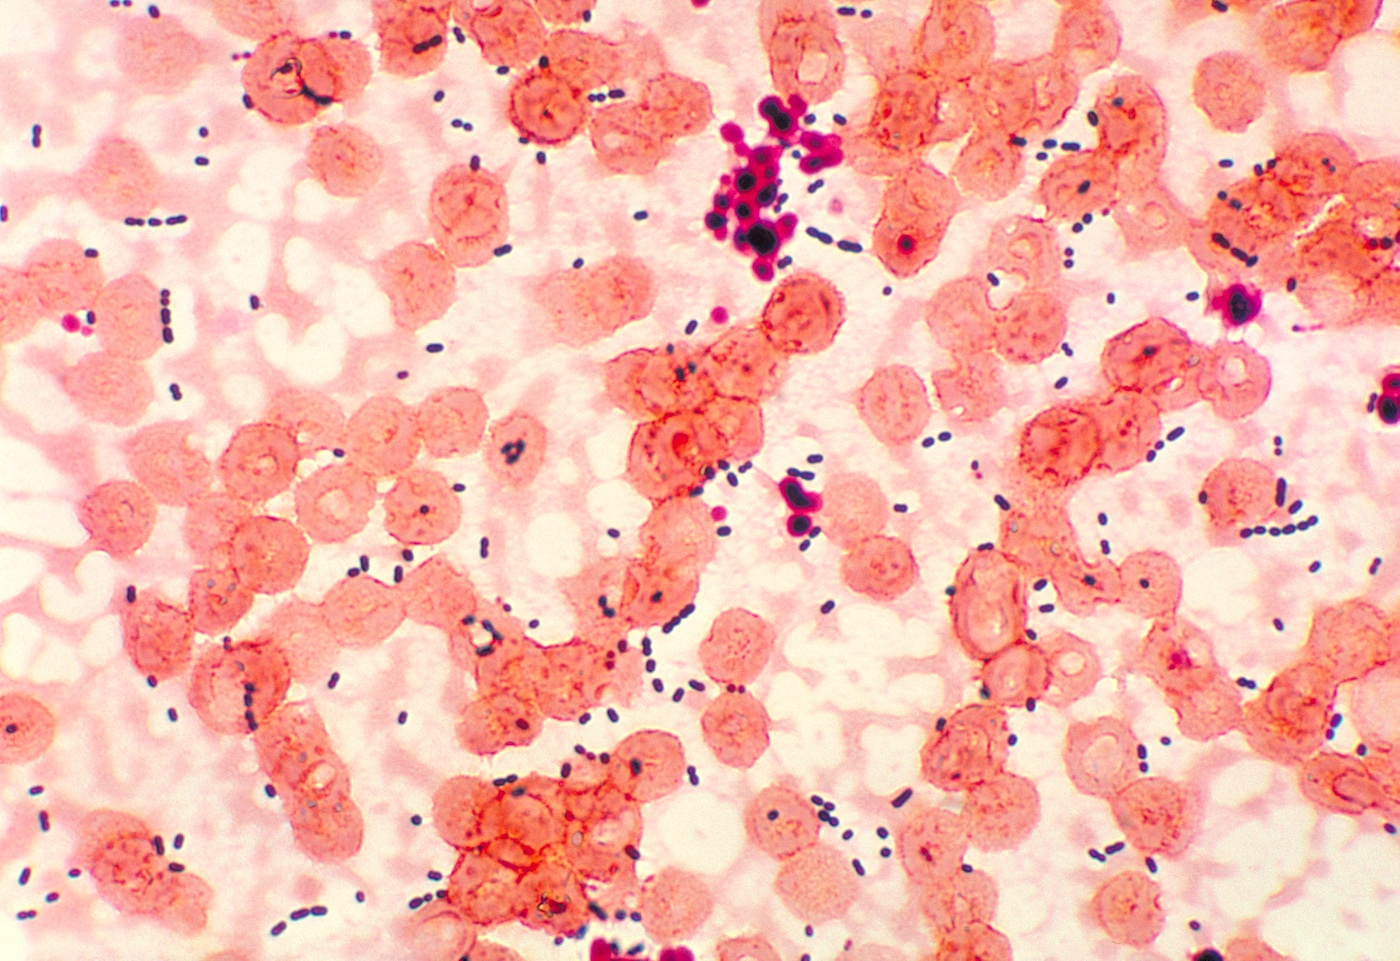 Tissue cells (red) infected with a small bacterium (purple).